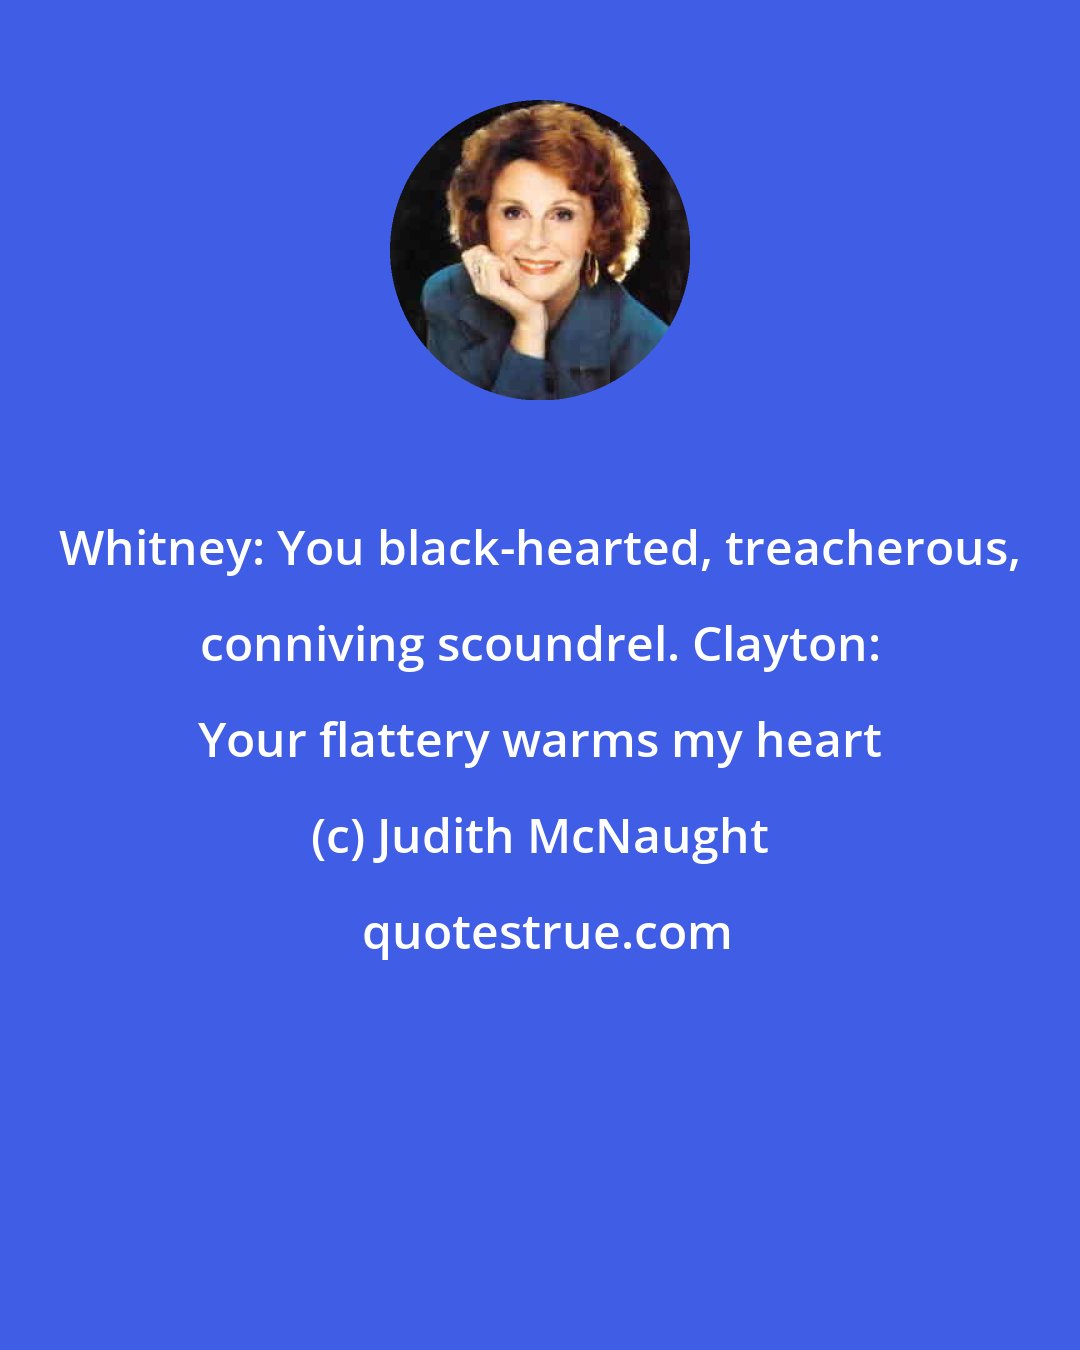 Judith McNaught: Whitney: You black-hearted, treacherous, conniving scoundrel. Clayton: Your flattery warms my heart